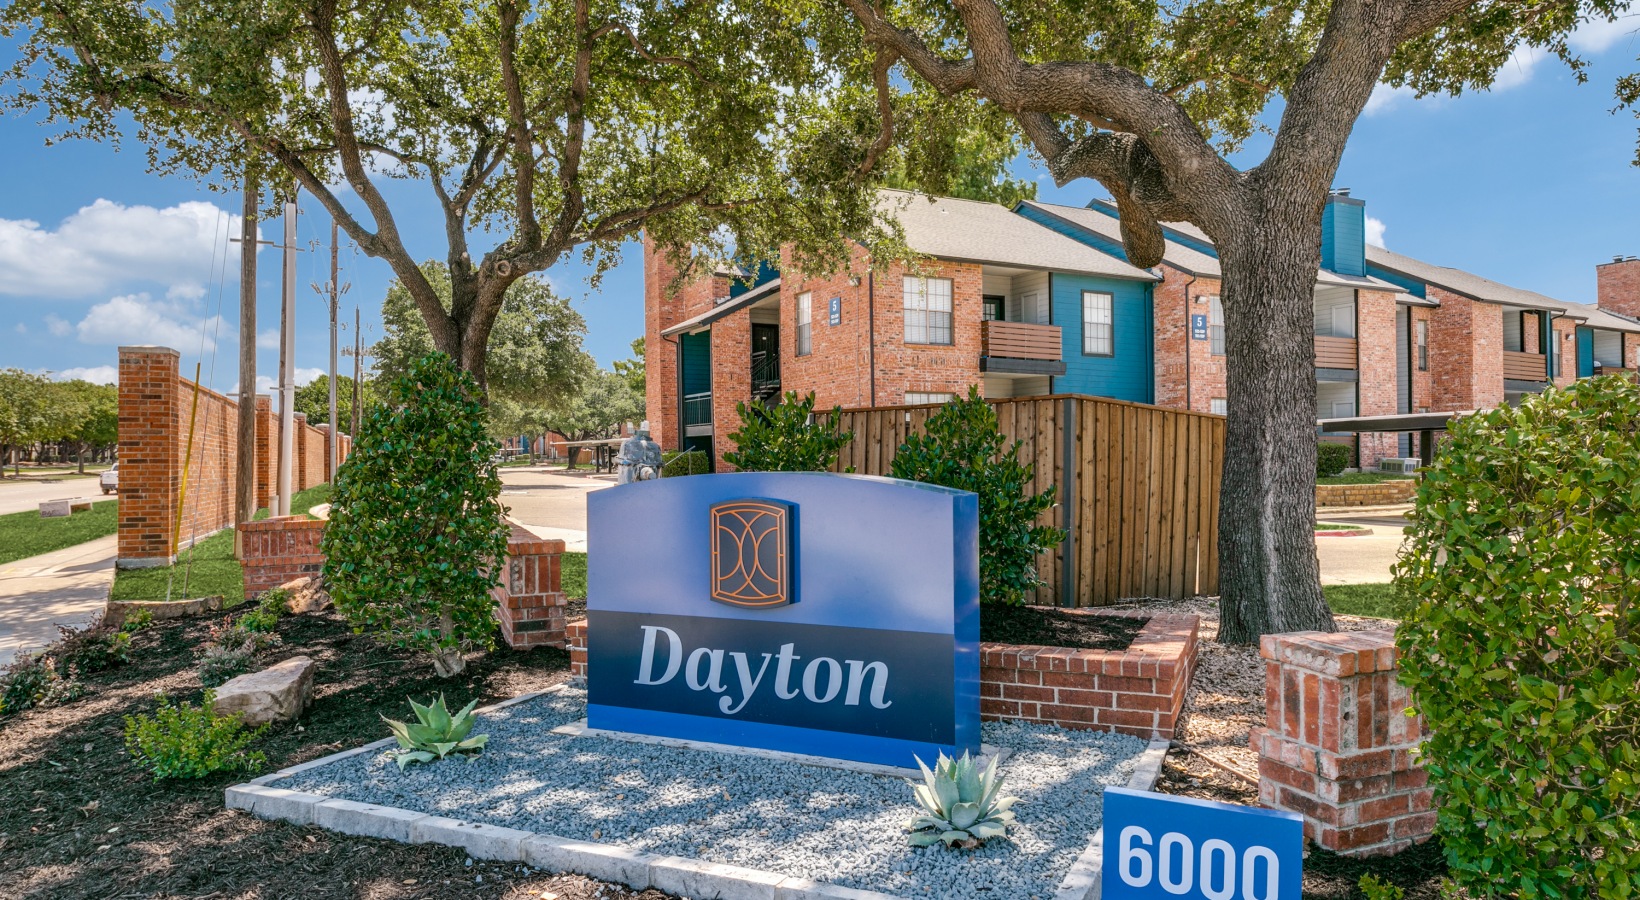 the sign for dayton apartments in dallas, texas at The  Dayton